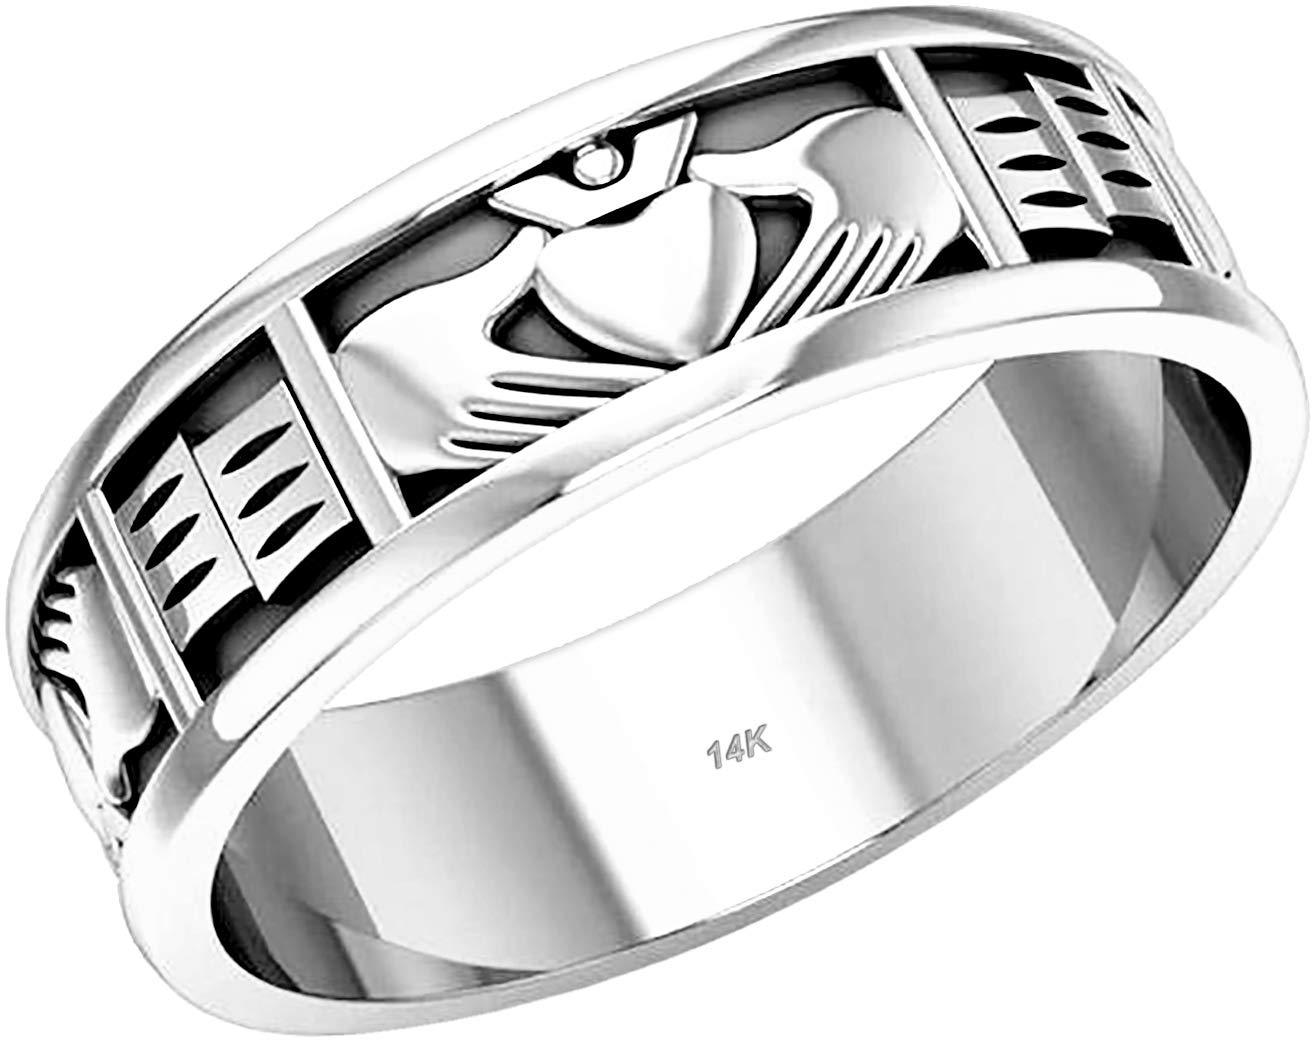 Ladies Gold and Silver Claddagh Ring - Molly Gallivans